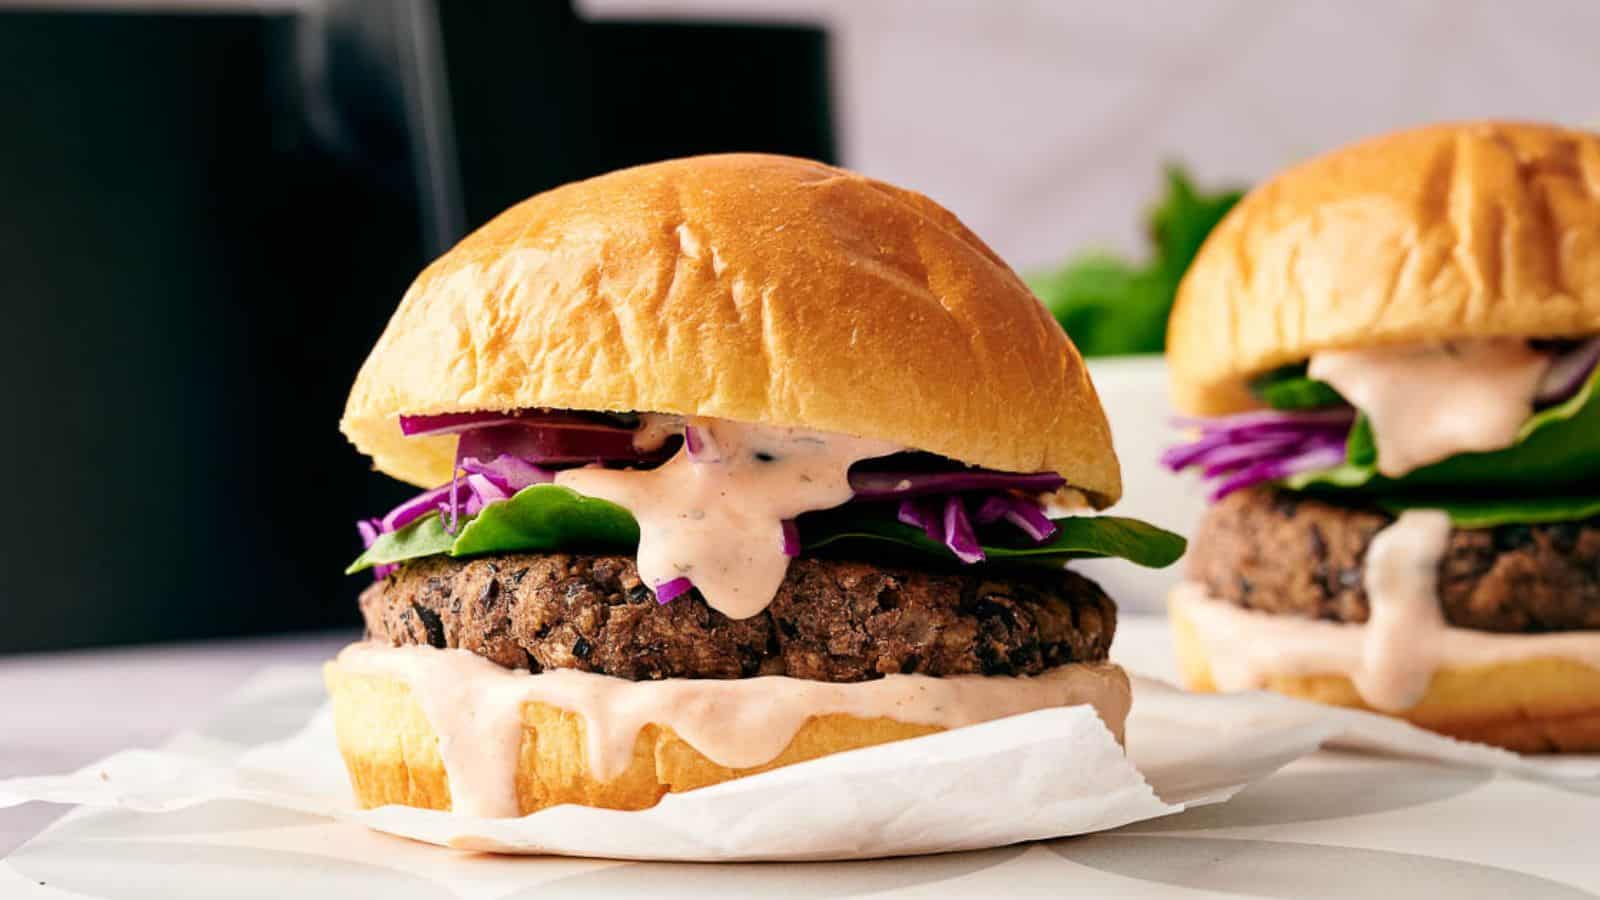 <p>Vegetarians rejoice with the Air Fryer Black Bean Burger. It’s a no-mess, no-fuss way to enjoy a flavorful and satisfying meat-free burger.<br><strong>Get the Recipe: </strong><a href="https://www.splashoftaste.com/air-fryer-black-bean-burger/?utm_source=msn&utm_medium=page&utm_campaign=msn">Air Fryer Black Bean Burger</a></p>